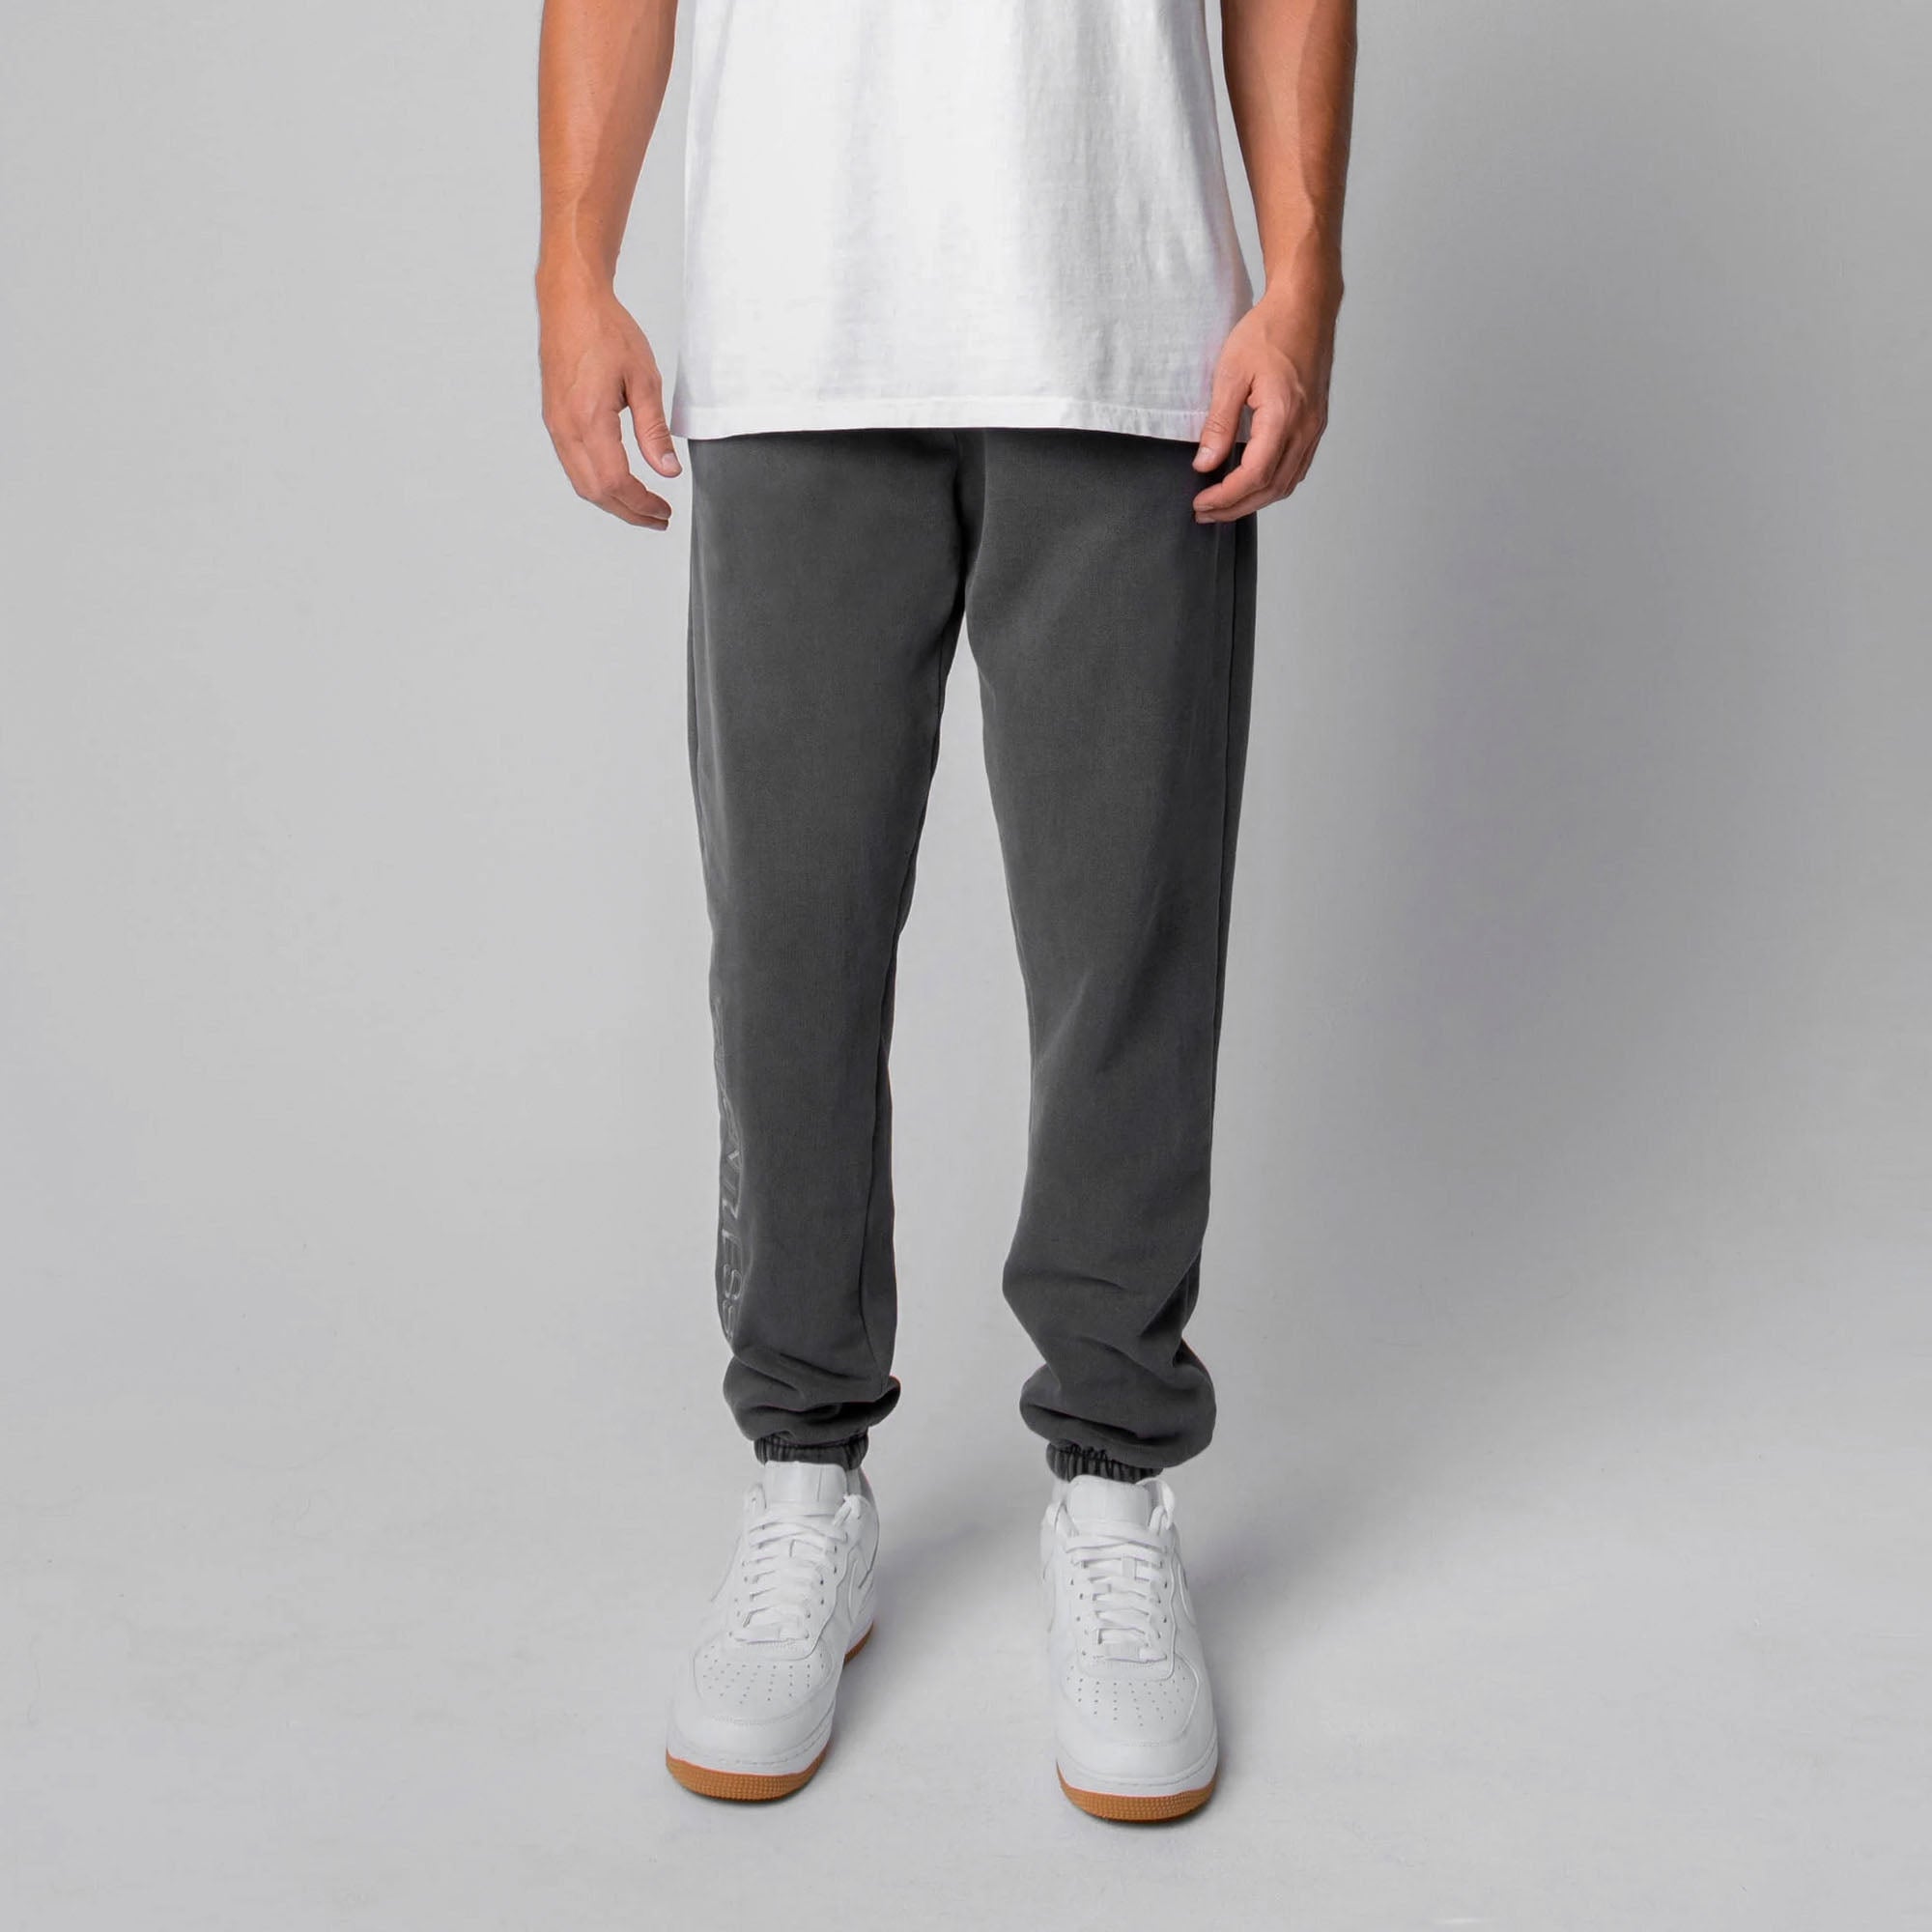 Embroidered cotton sweatpants